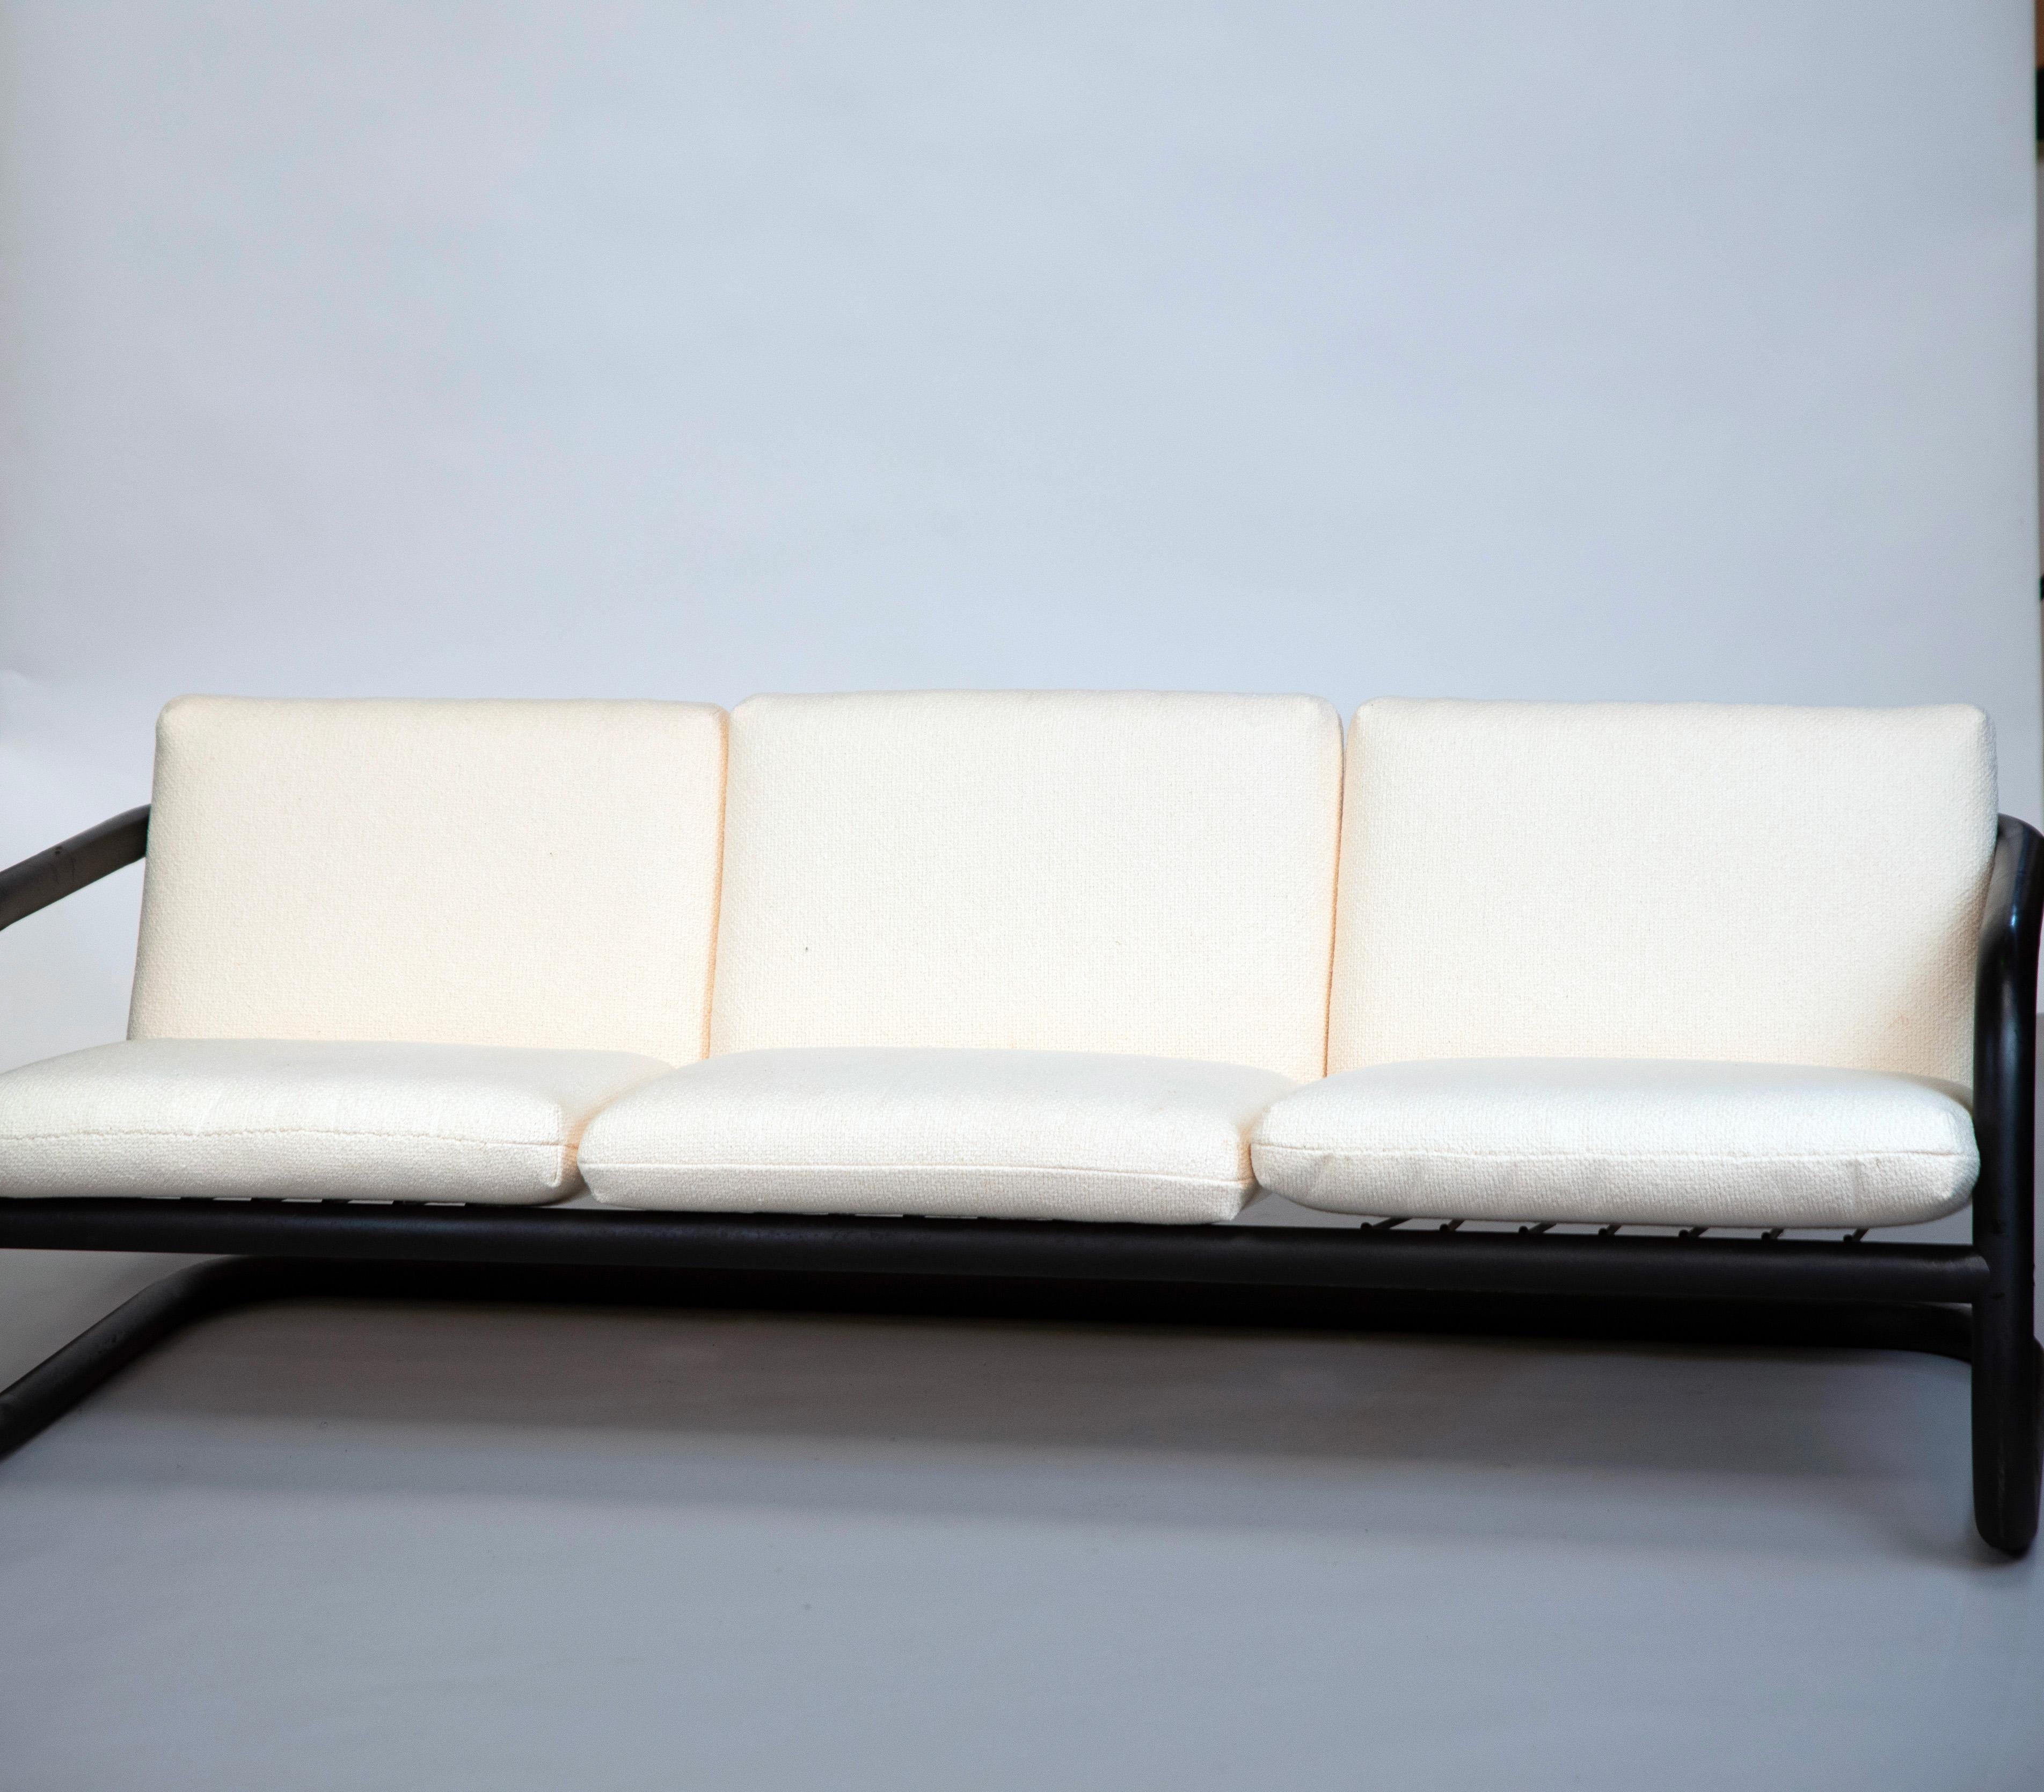 Designed in the 1970s, this three-seater sofa in tubular metal and white fabric by Geraldo de Barros is to be placed in the artistic continuity of its creators, who was an important artist (designer, engraver, painter, photographer, graphic designer